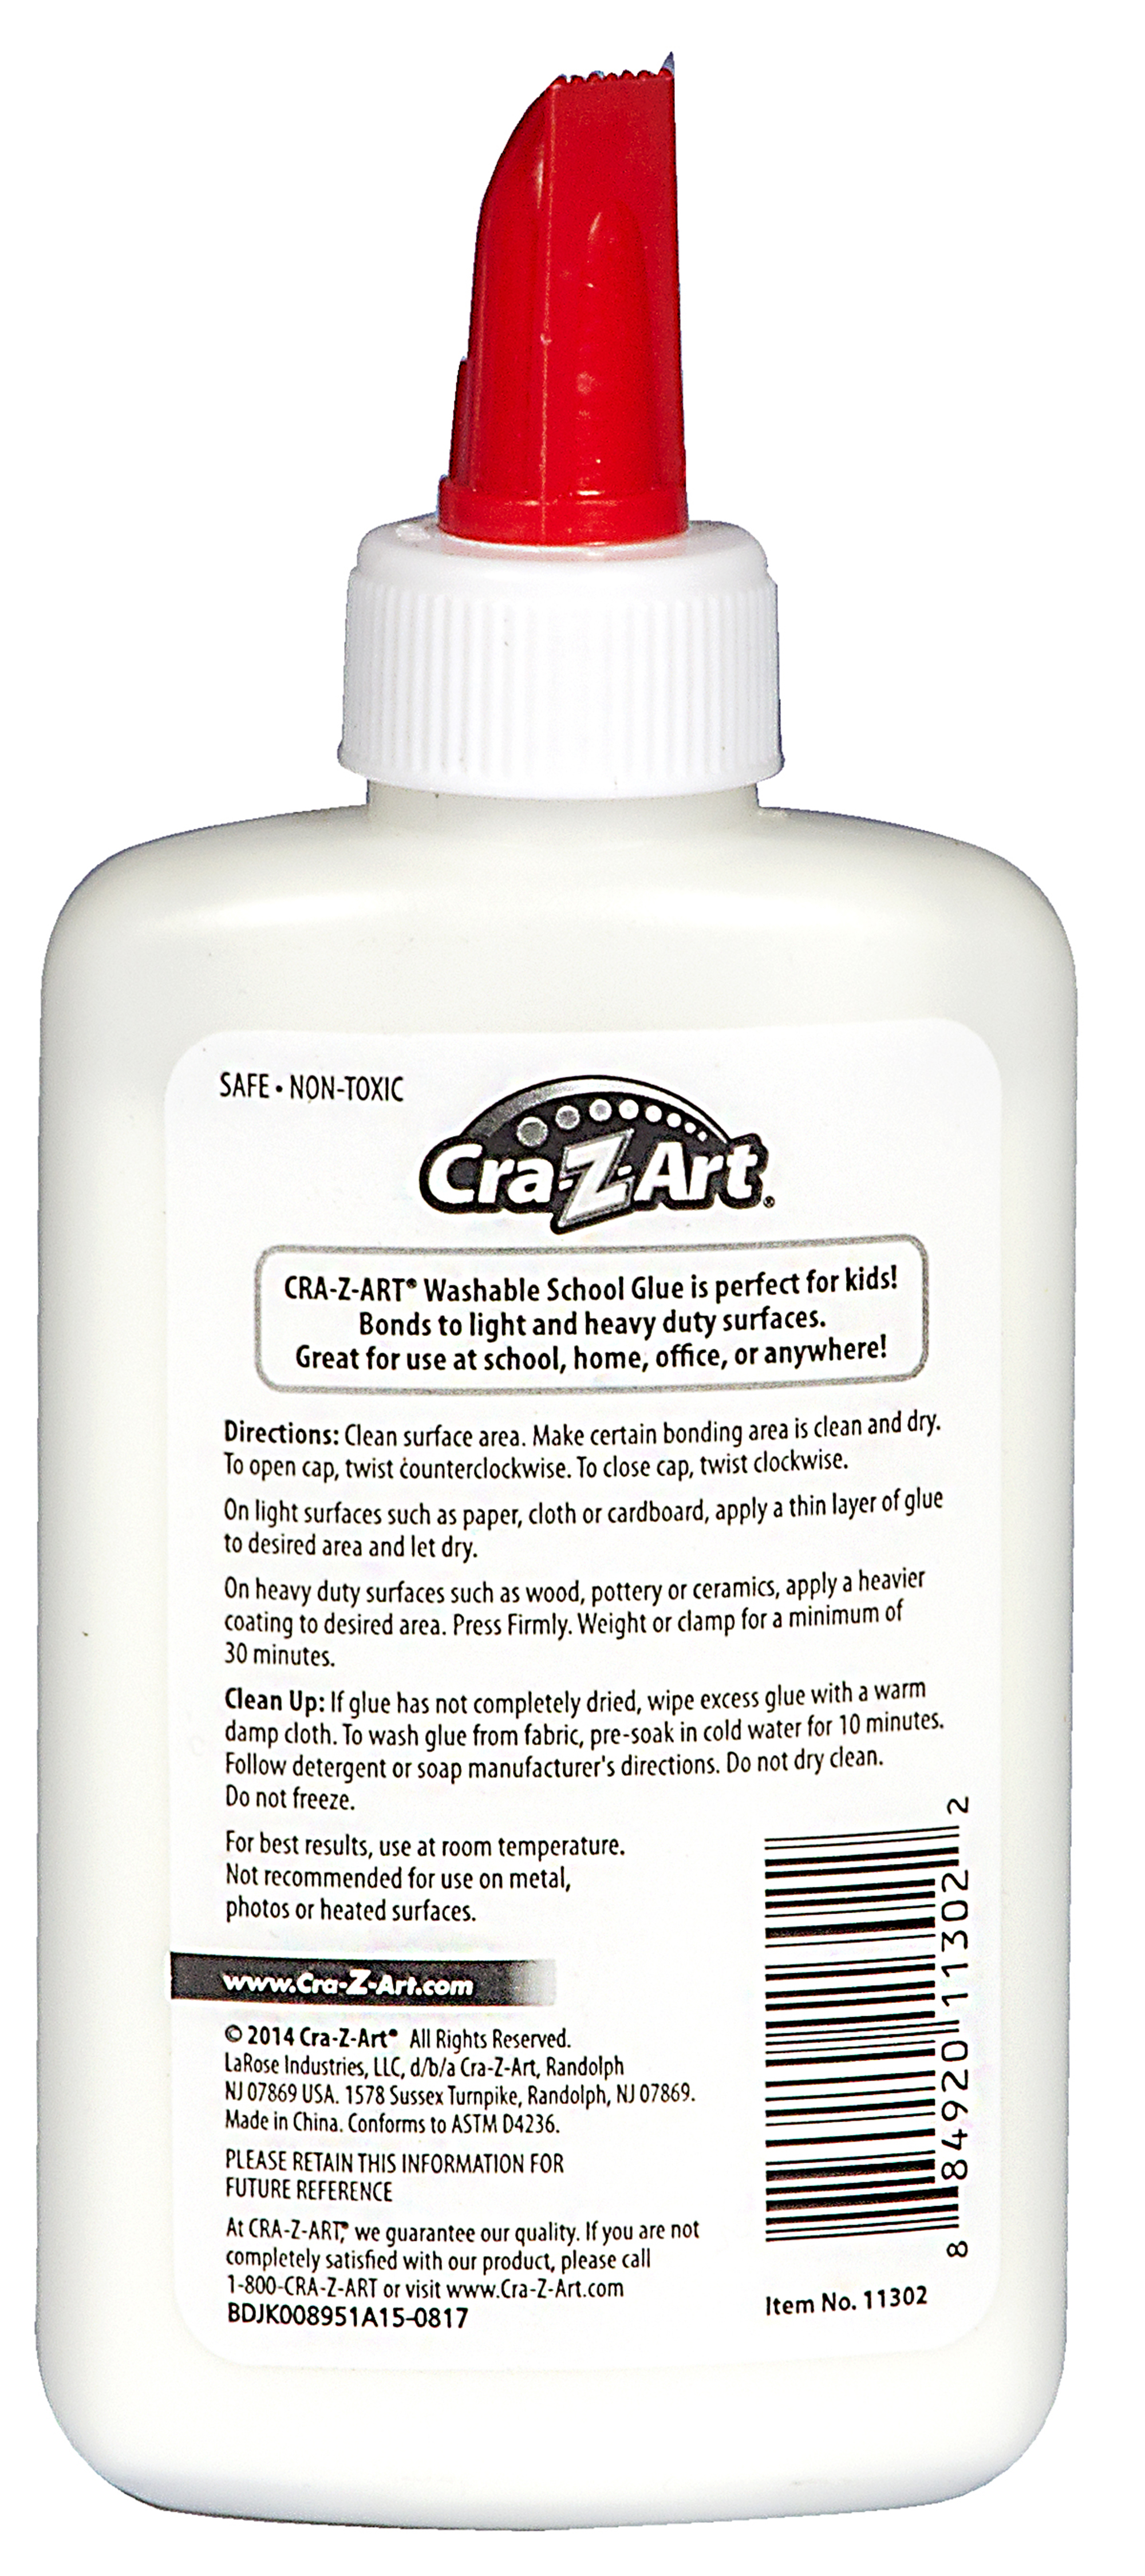 Cra-Z-Art Washable School Glue, 4oz White, Assembled Product Weight 0.4lb - image 3 of 9